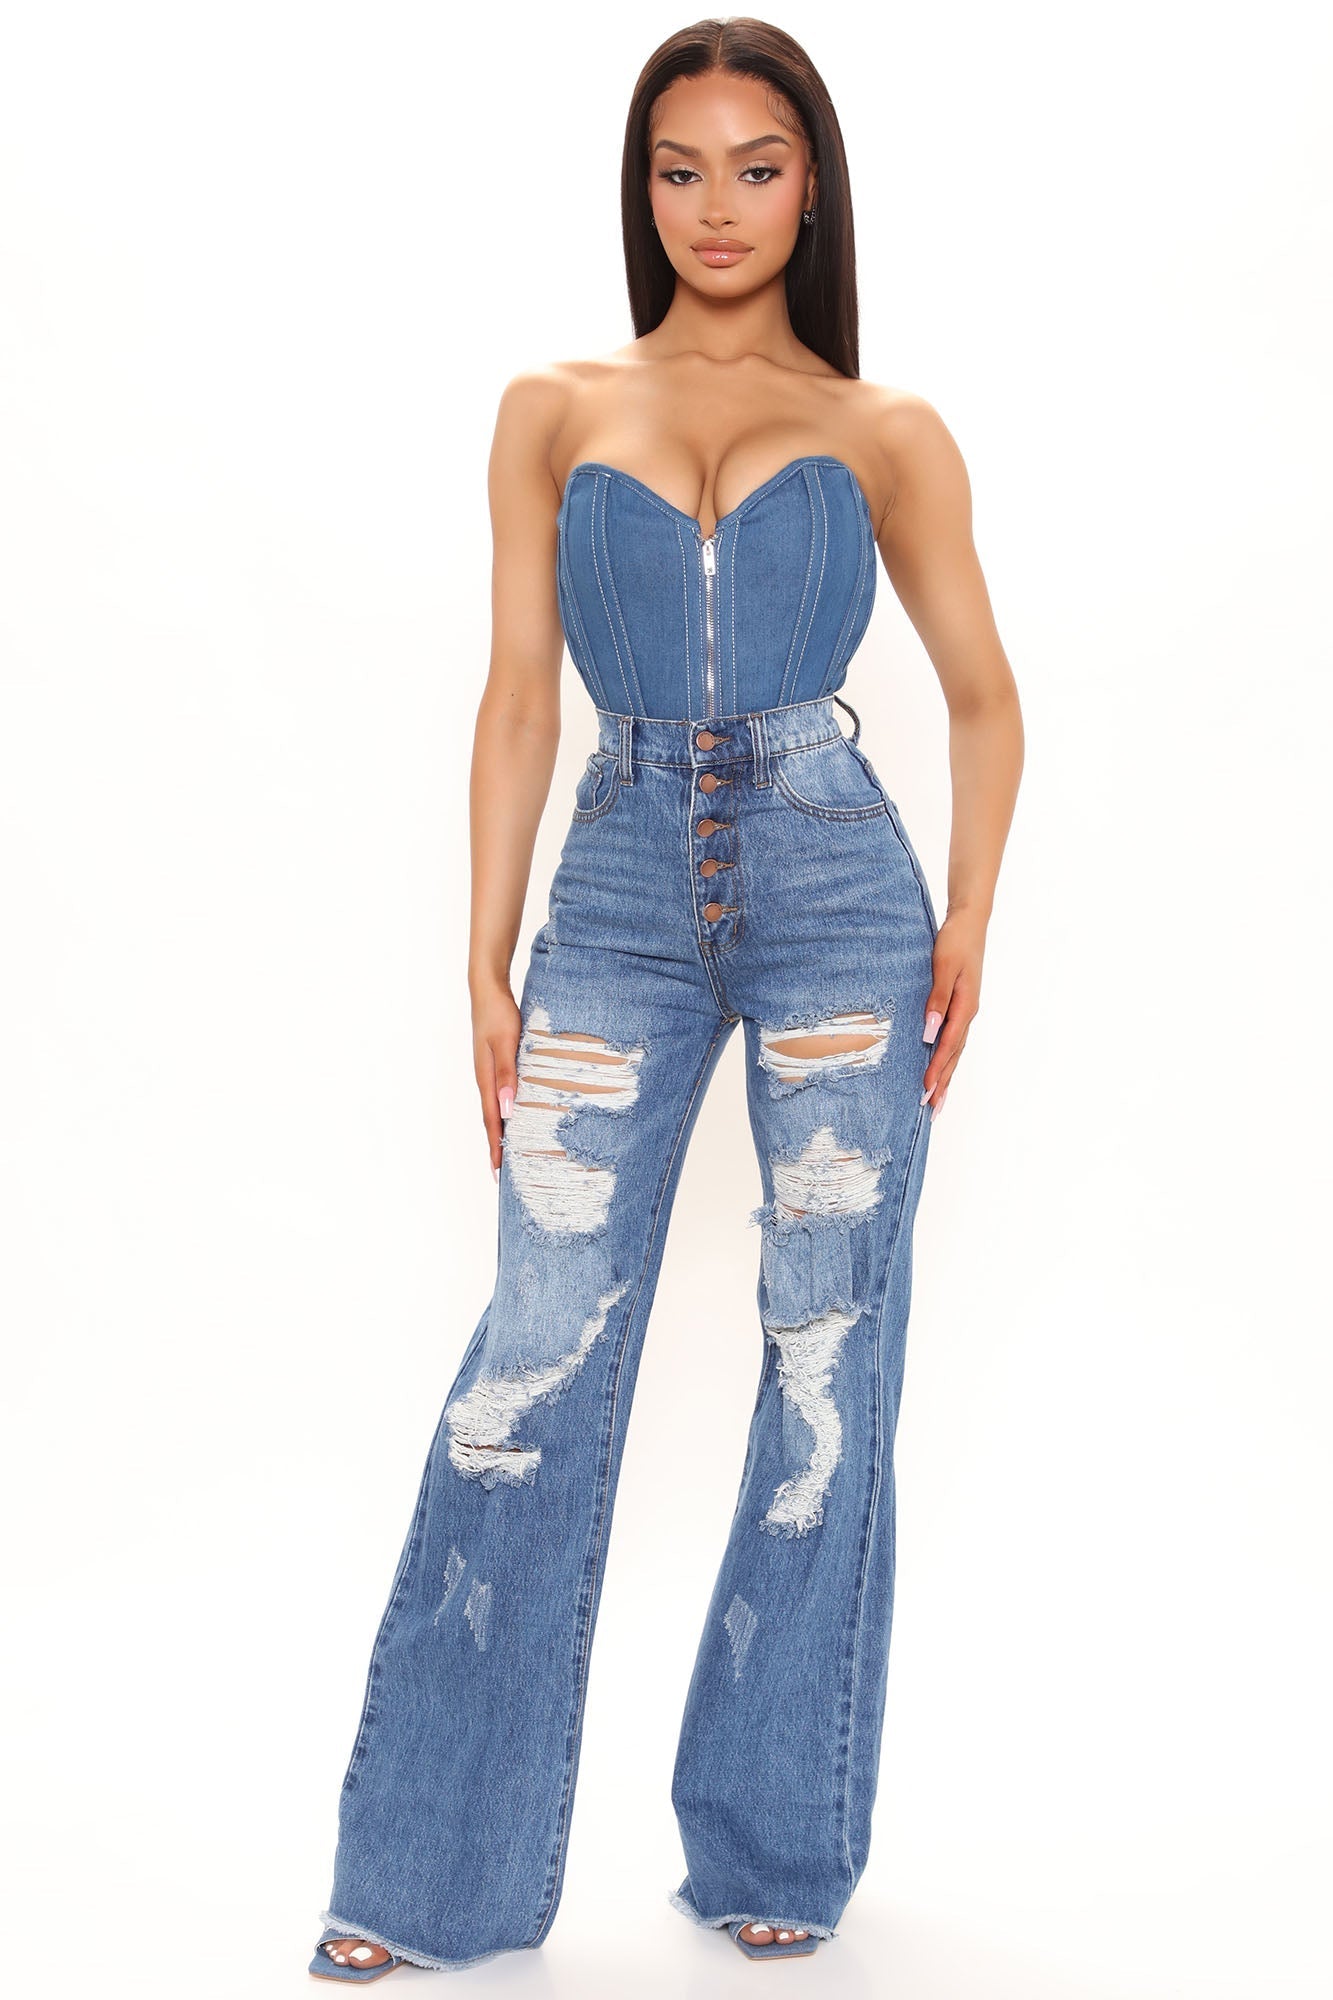 Looking For Trouble Ripped Jeans - Medium Blue Wash